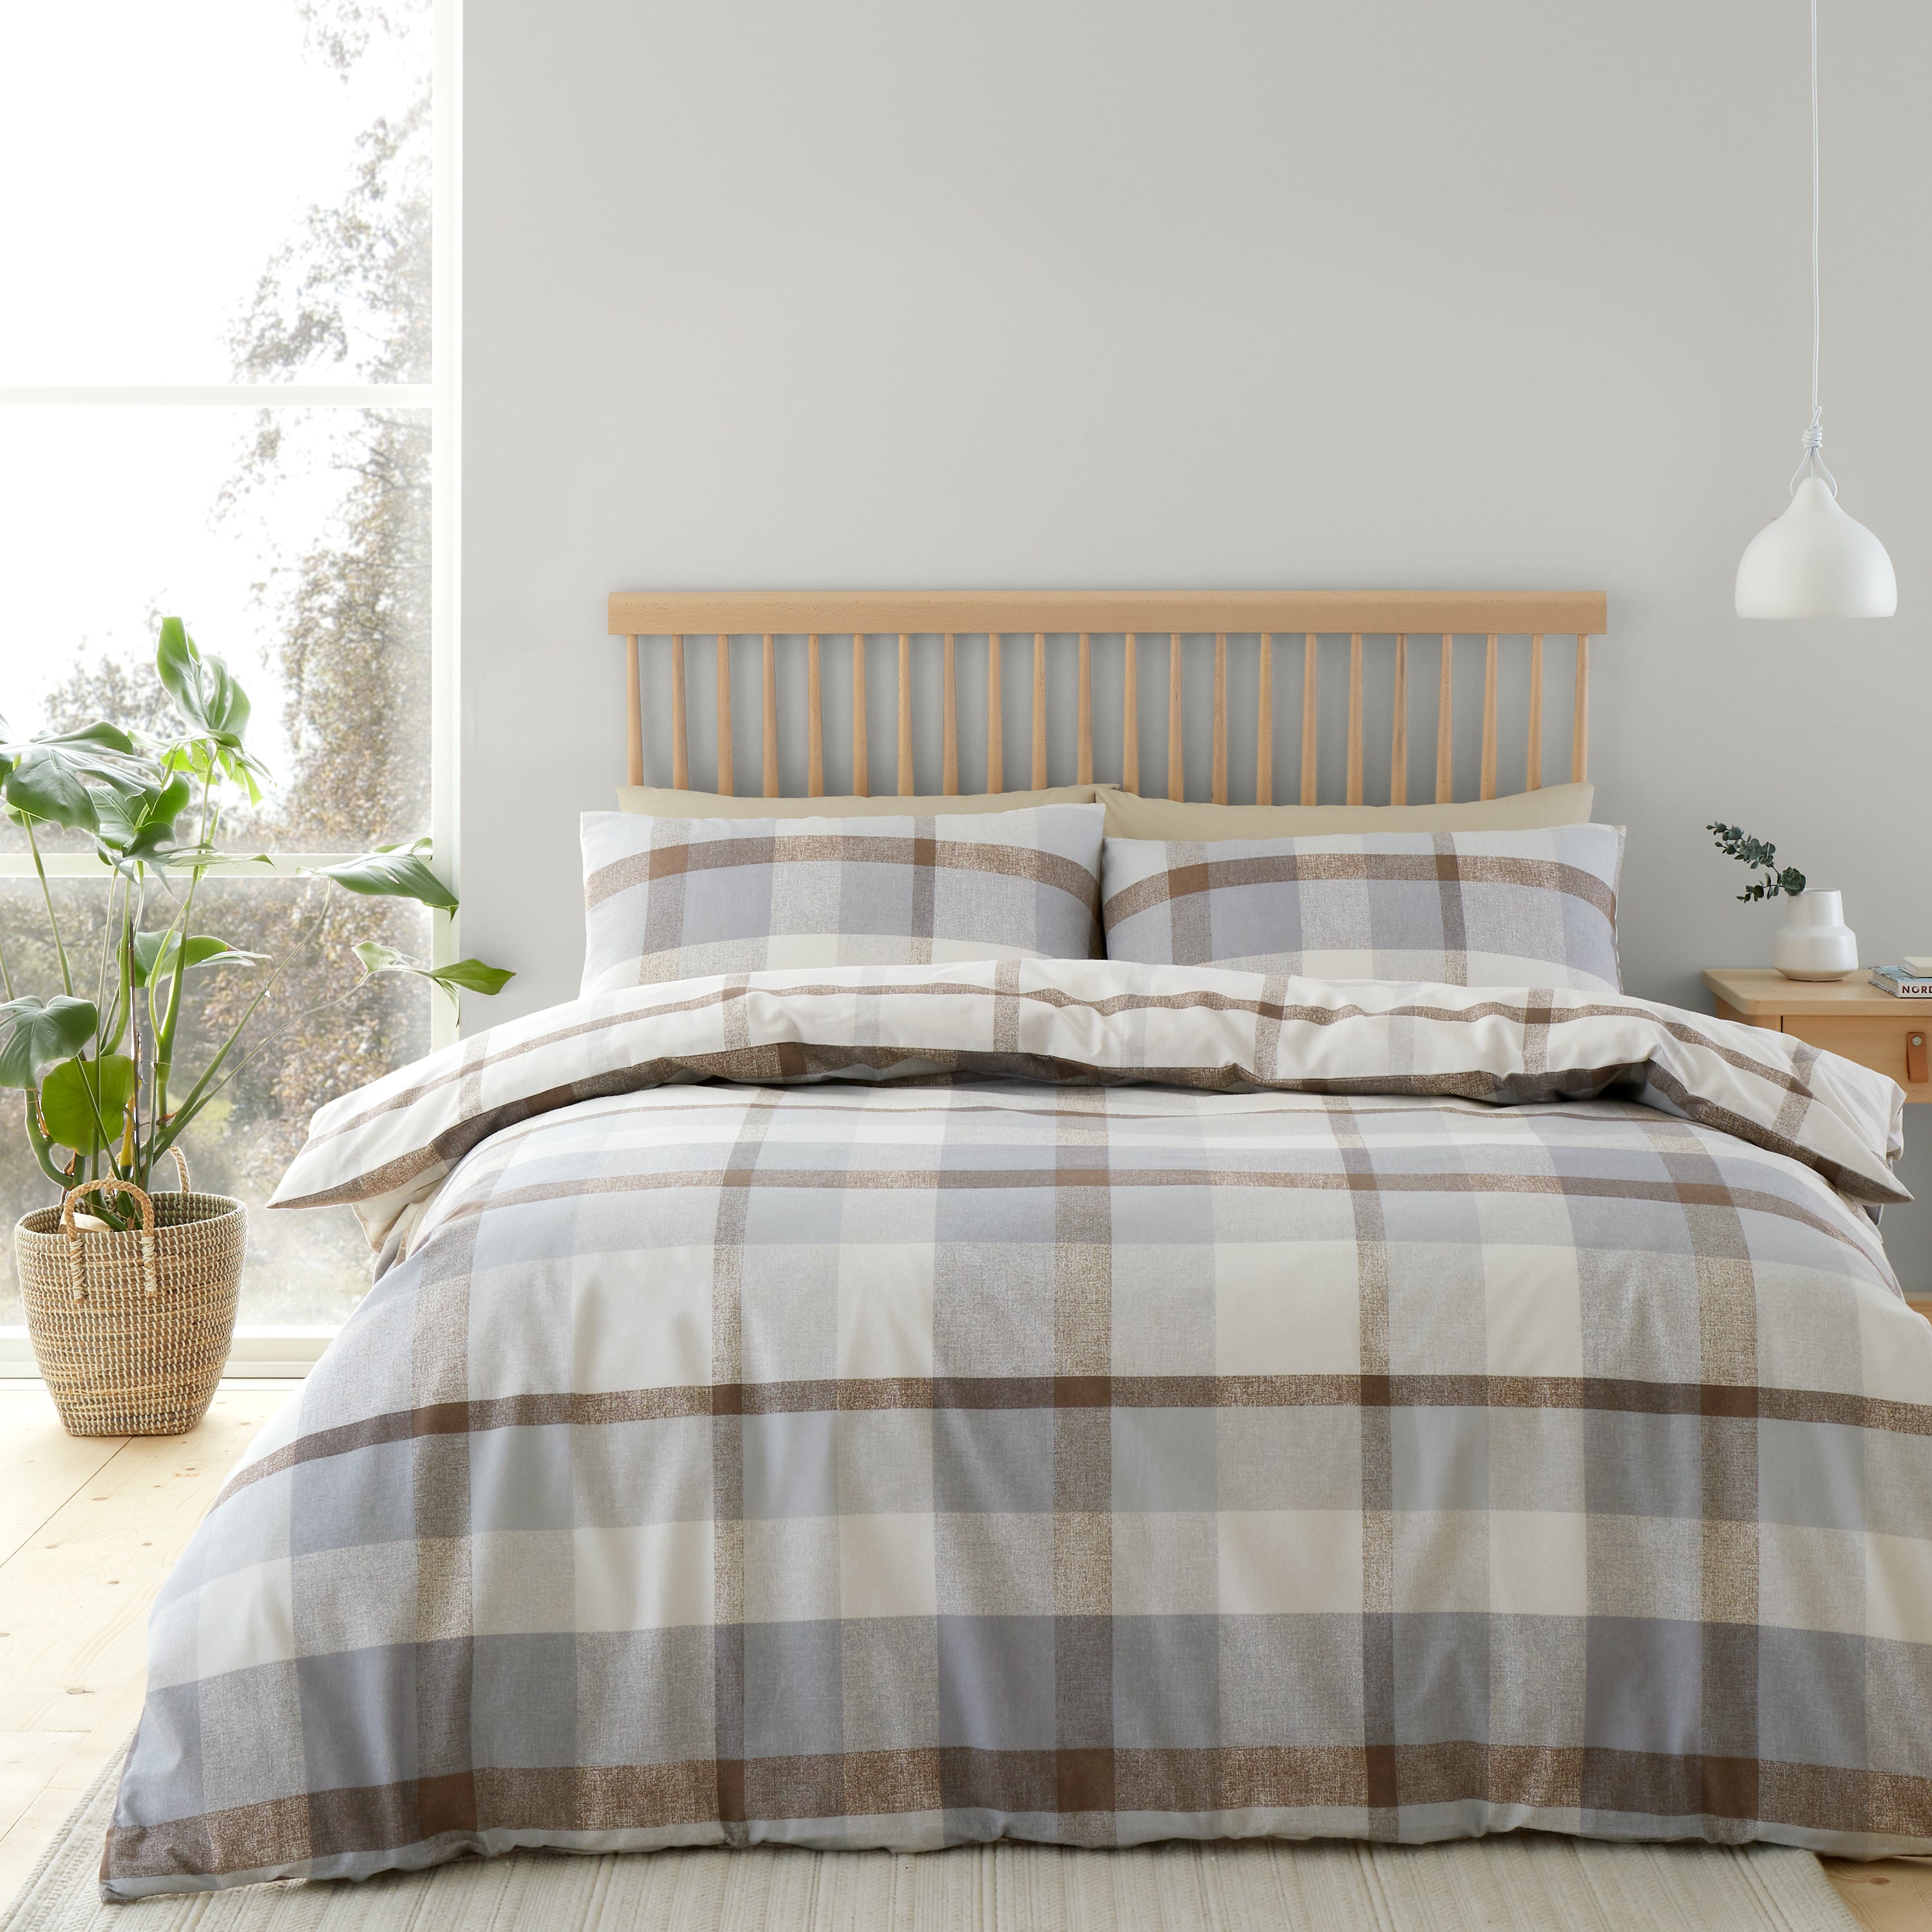 Catherine Lansfield Reversible Check 100 Brushed Cotton Duvet Cover Pillowcase Set Beige